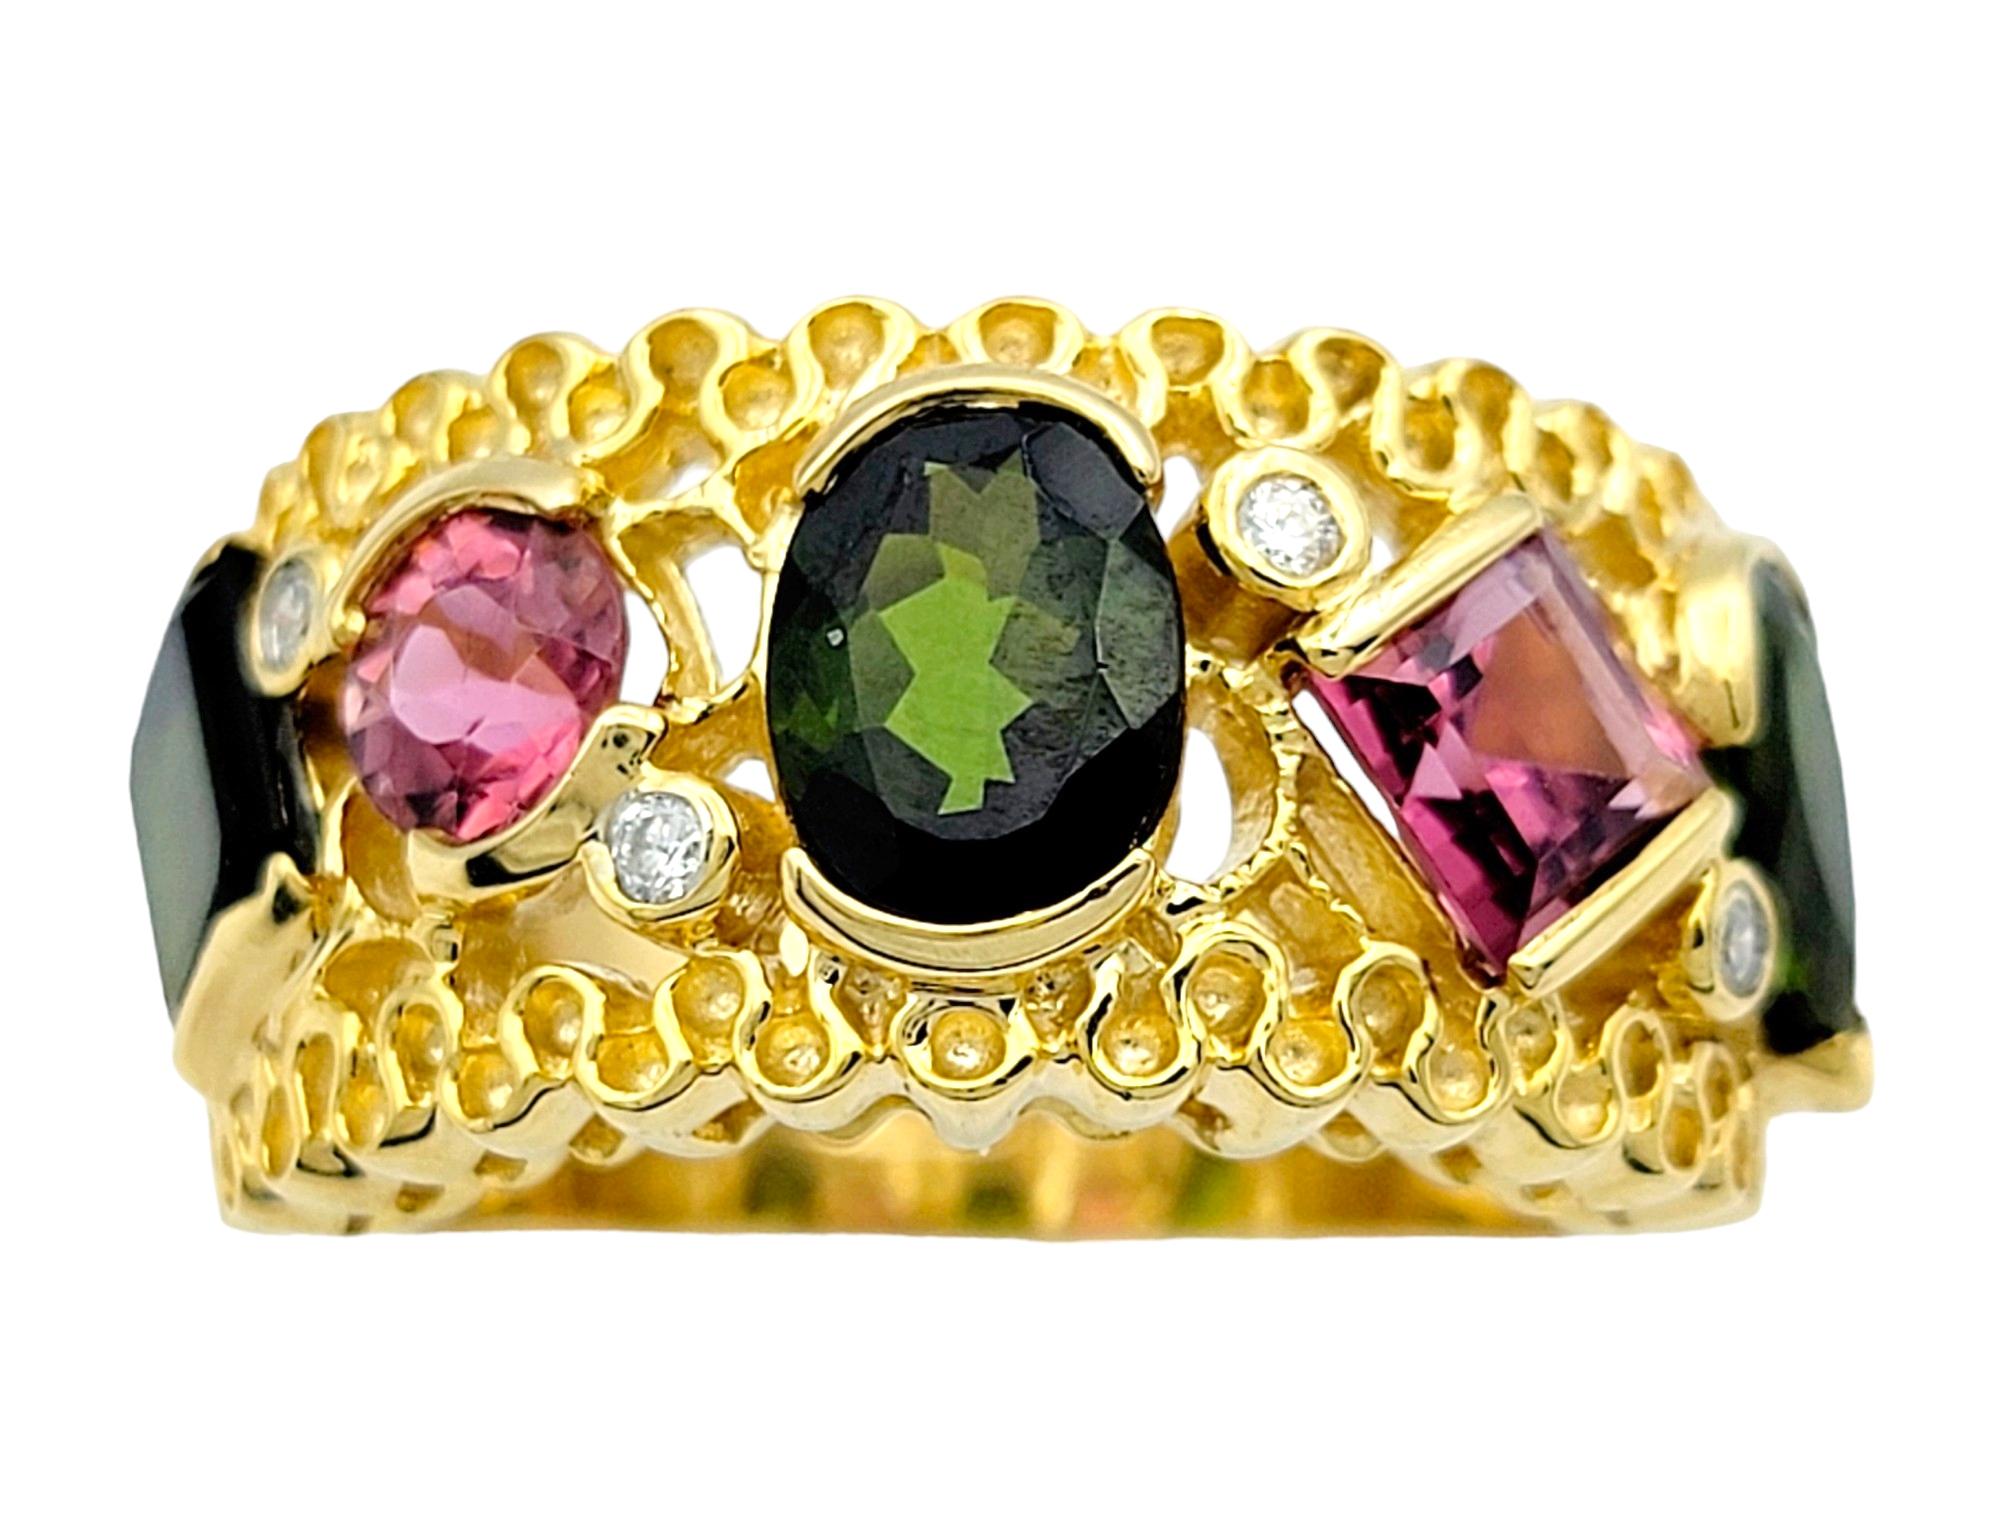 Ring Size: 8

This captivating band ring exudes a vibrant and eclectic charm with its array of tourmalines set in warm 14 karat yellow gold. Each tourmaline, boasting hues of pink and green, adds a unique touch of color and character to the ring.